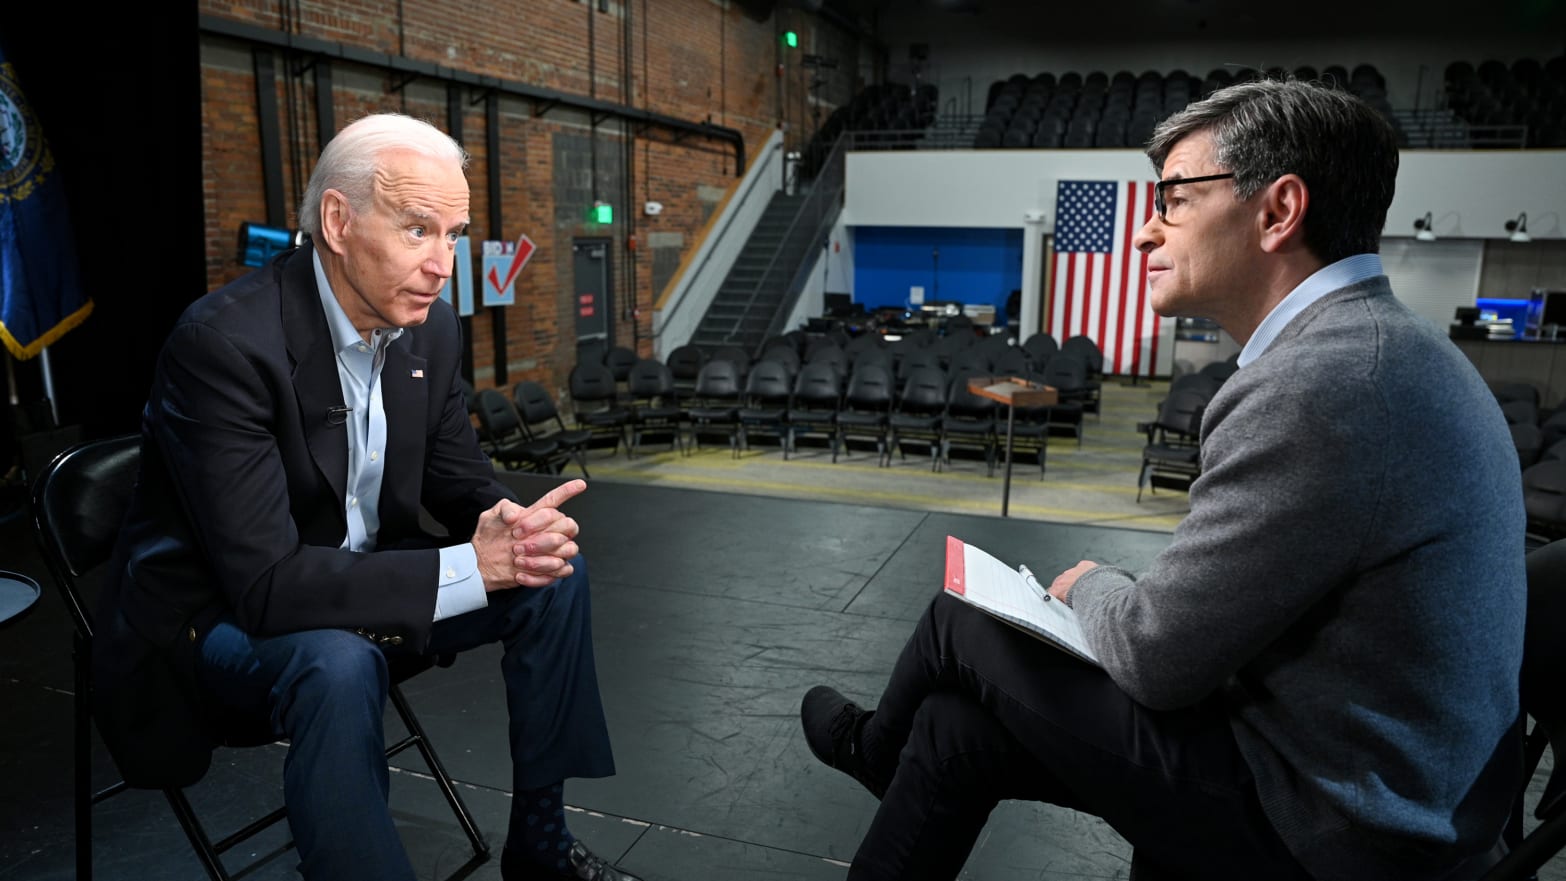 Joe Biden and George Stephanopoulos sitting for an interview.